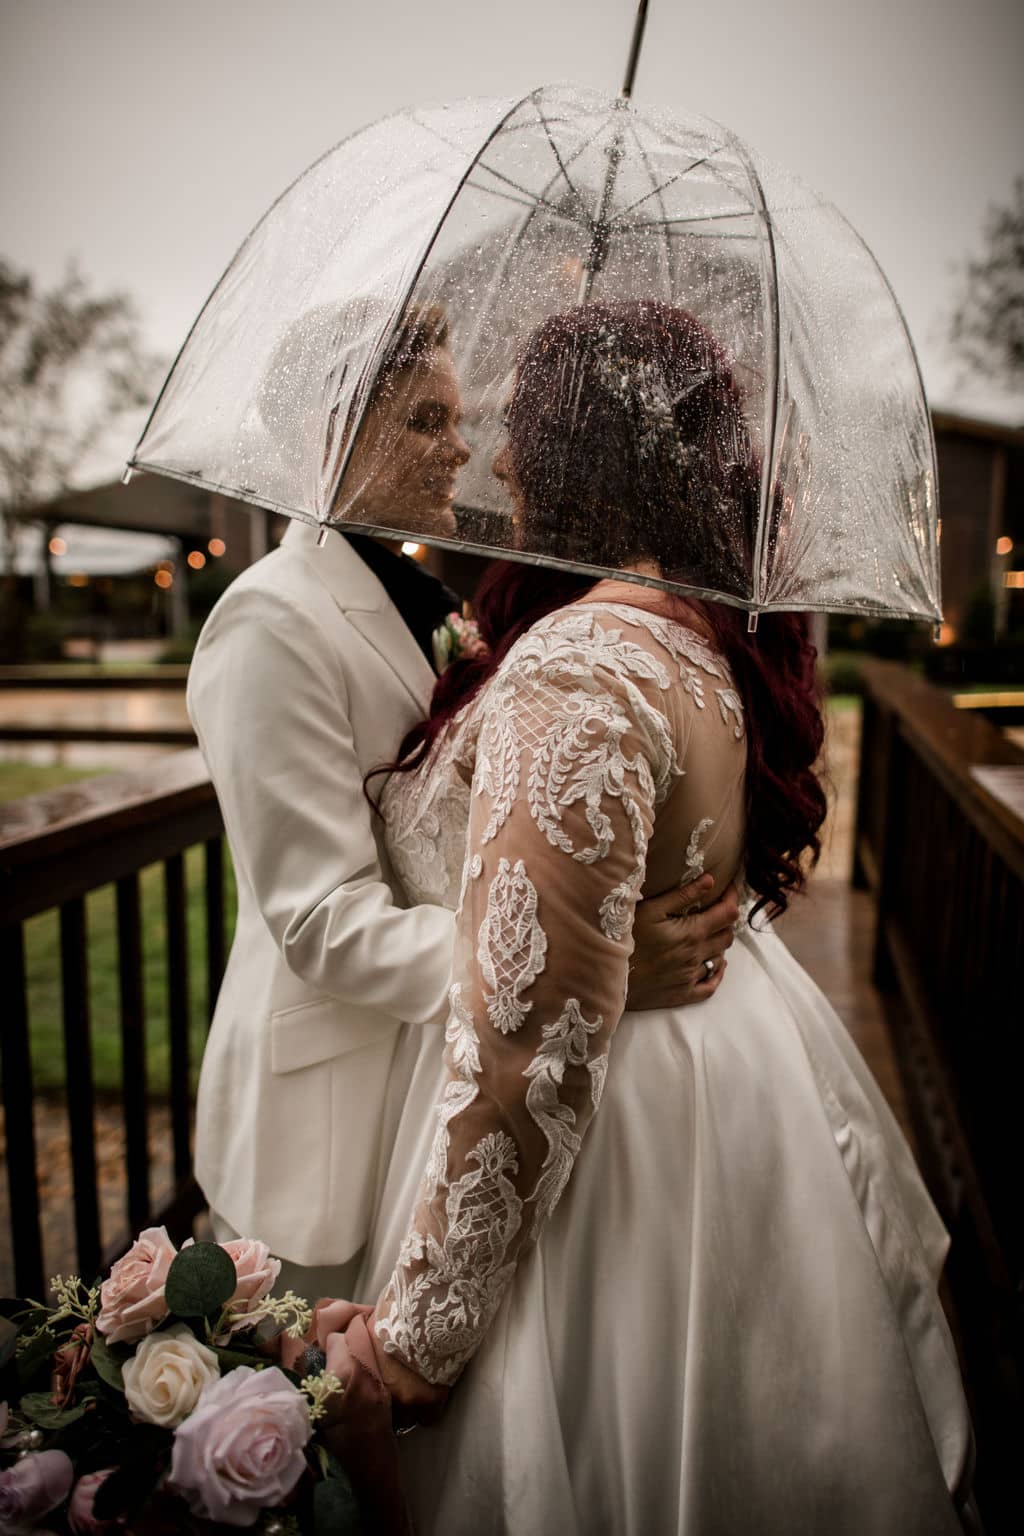 the texas brides embrace each other in white under a clear umbrella